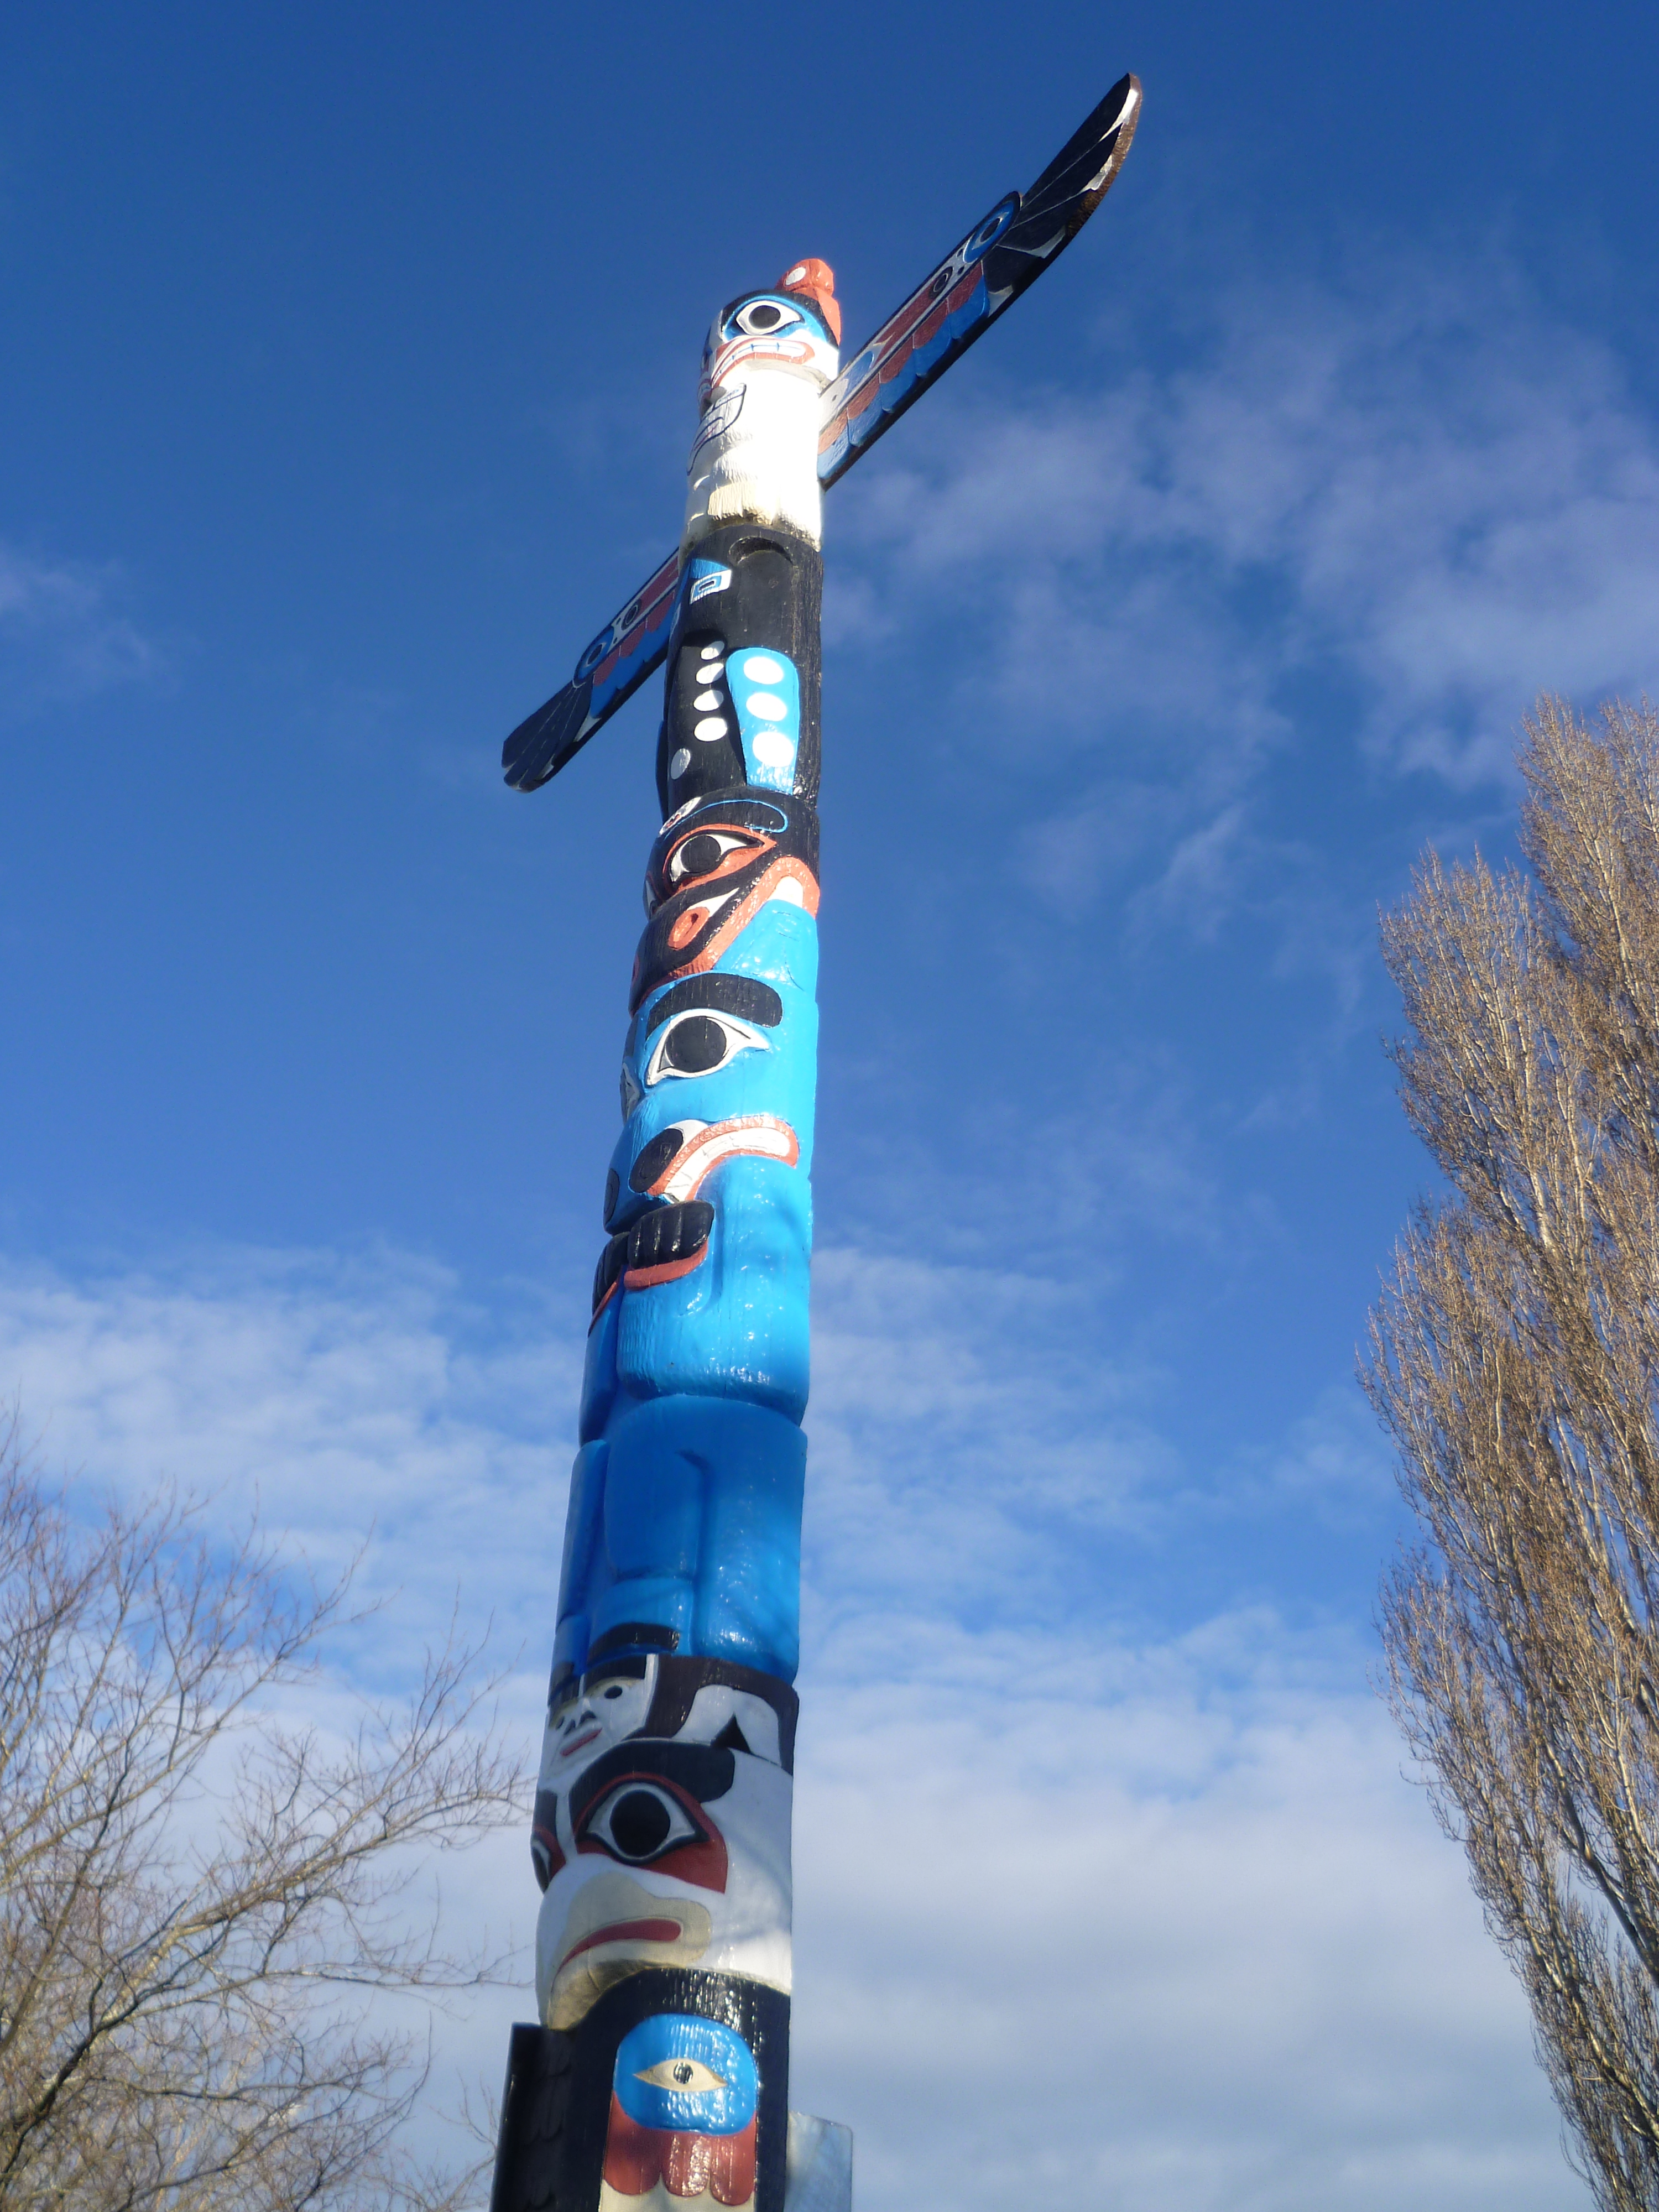 Totem Pole, Christchurch Airport http://www.christchurchairport.co.nz/en/about-us/media-centre/media-releases/2013/totem-pole-restored-and-repositioned/